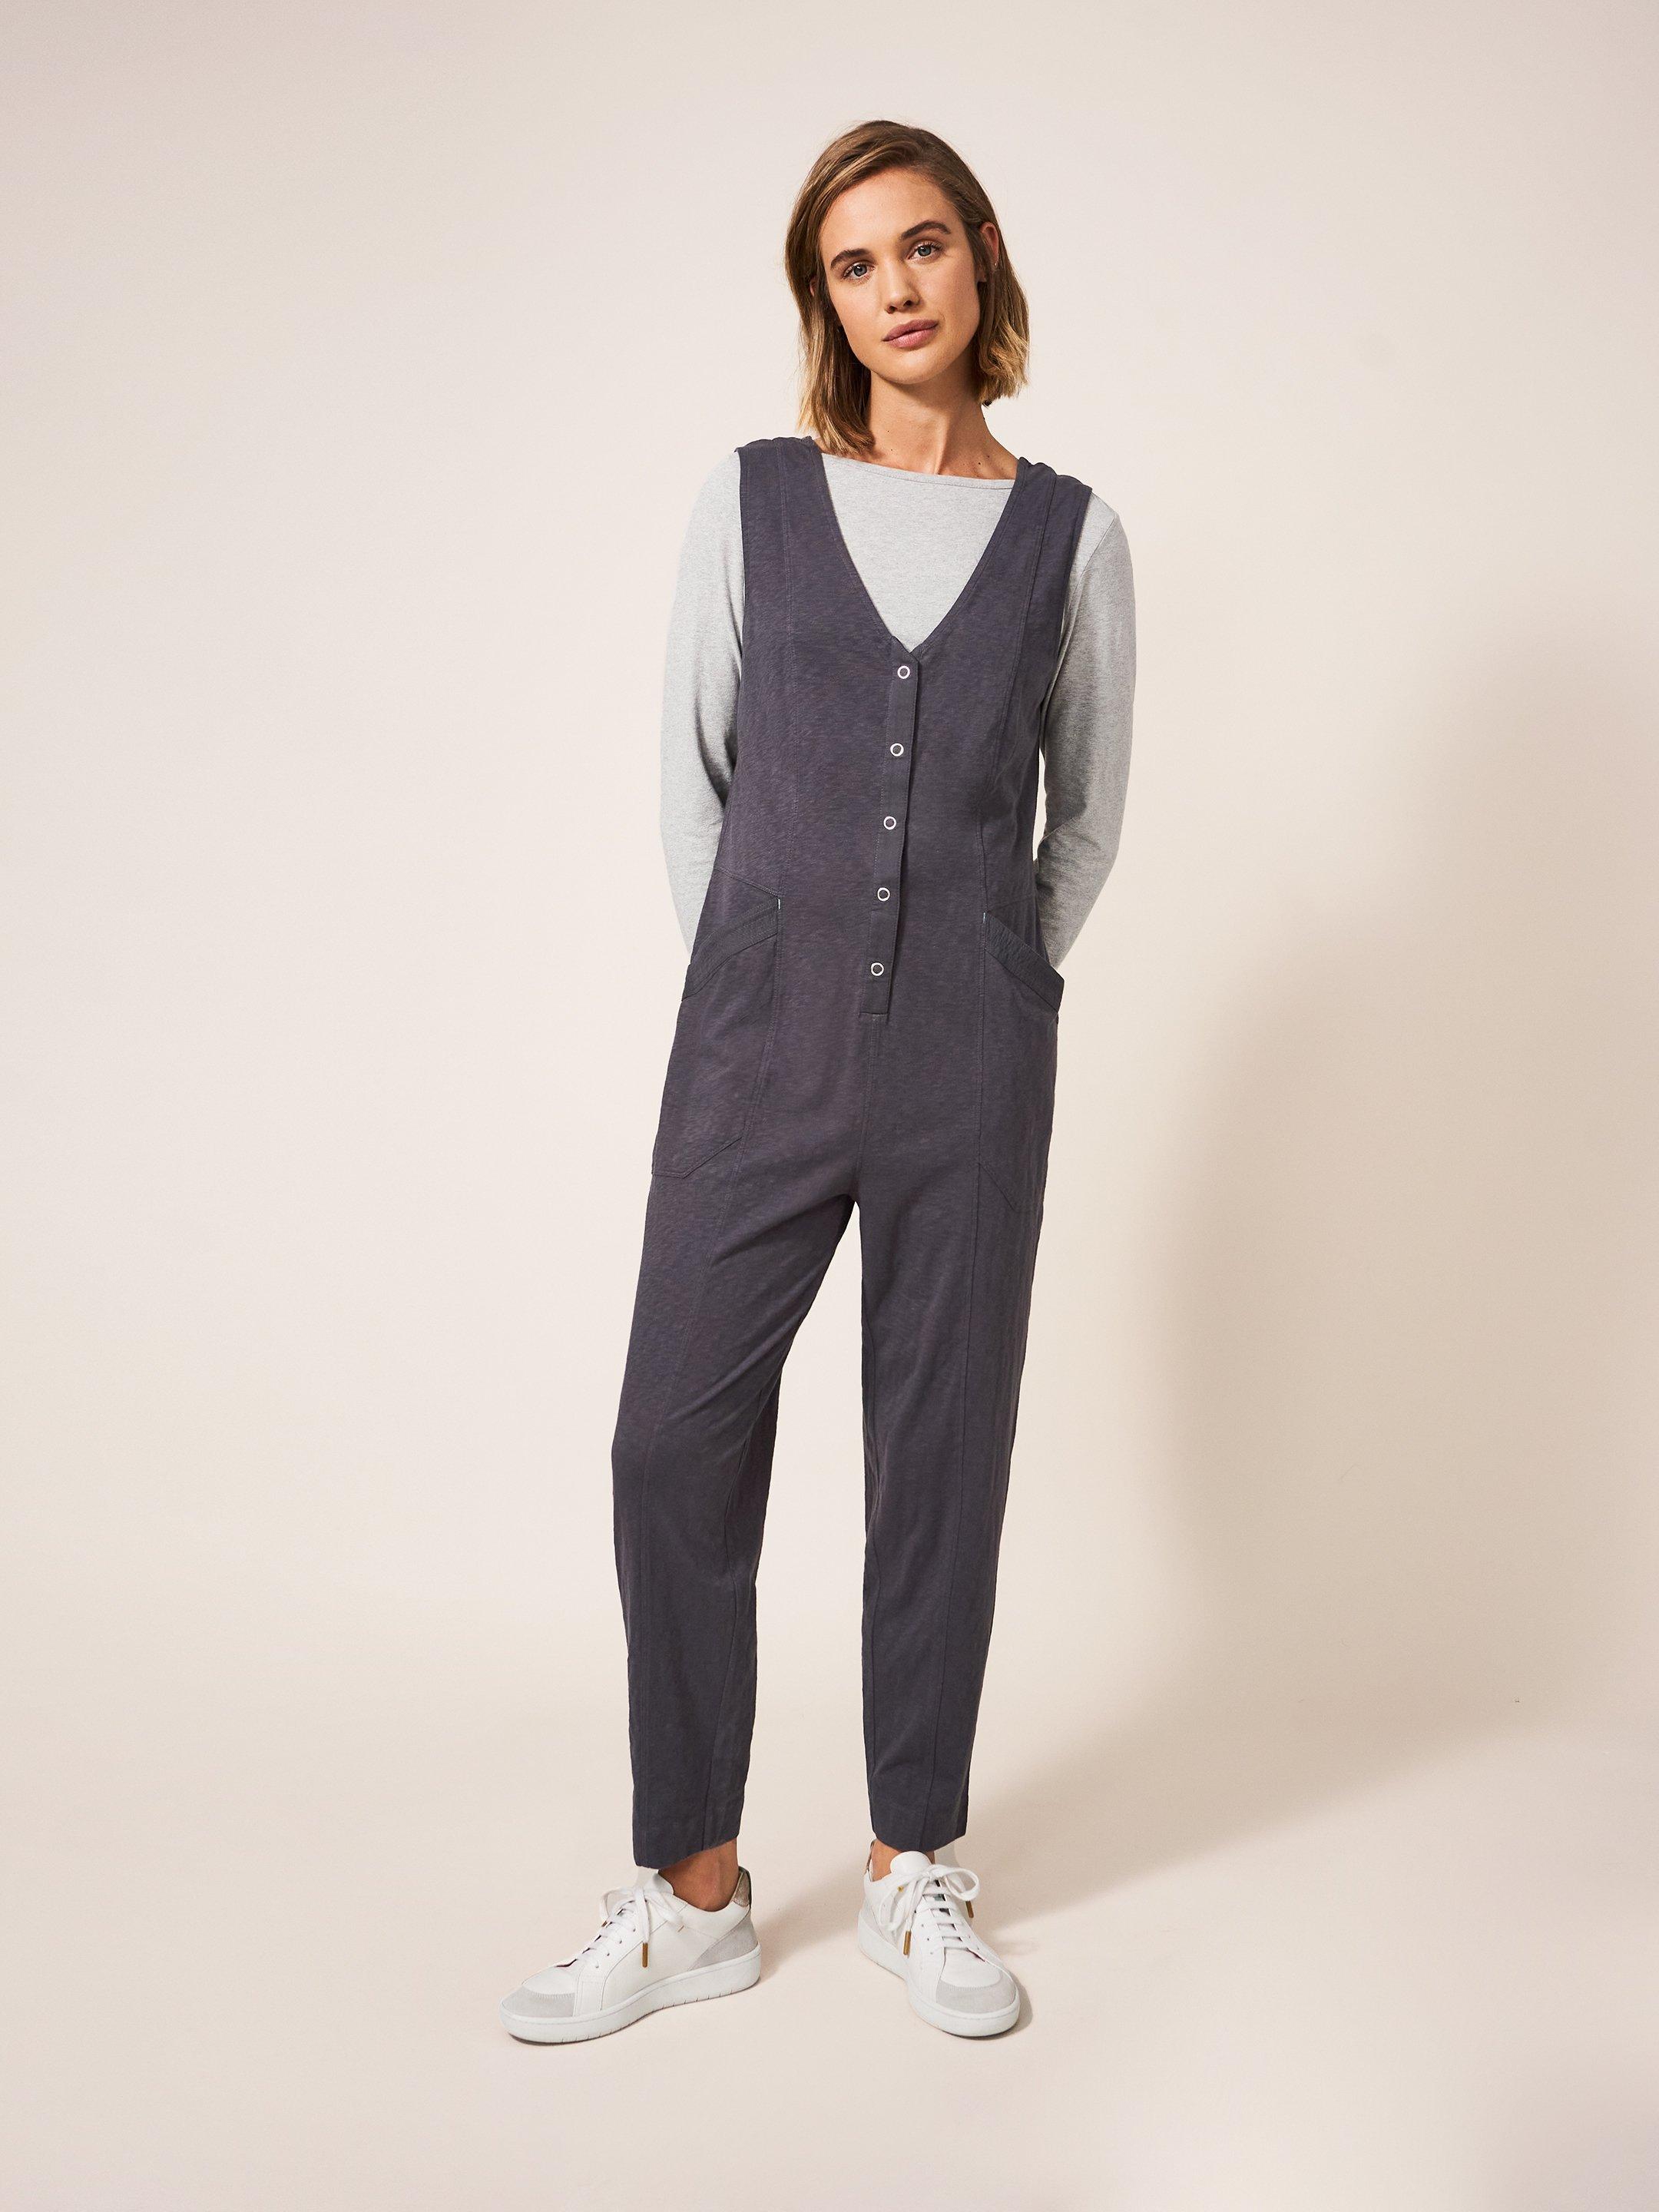 Buy White Stuff Viola Linen Dungarees from the Next UK online shop